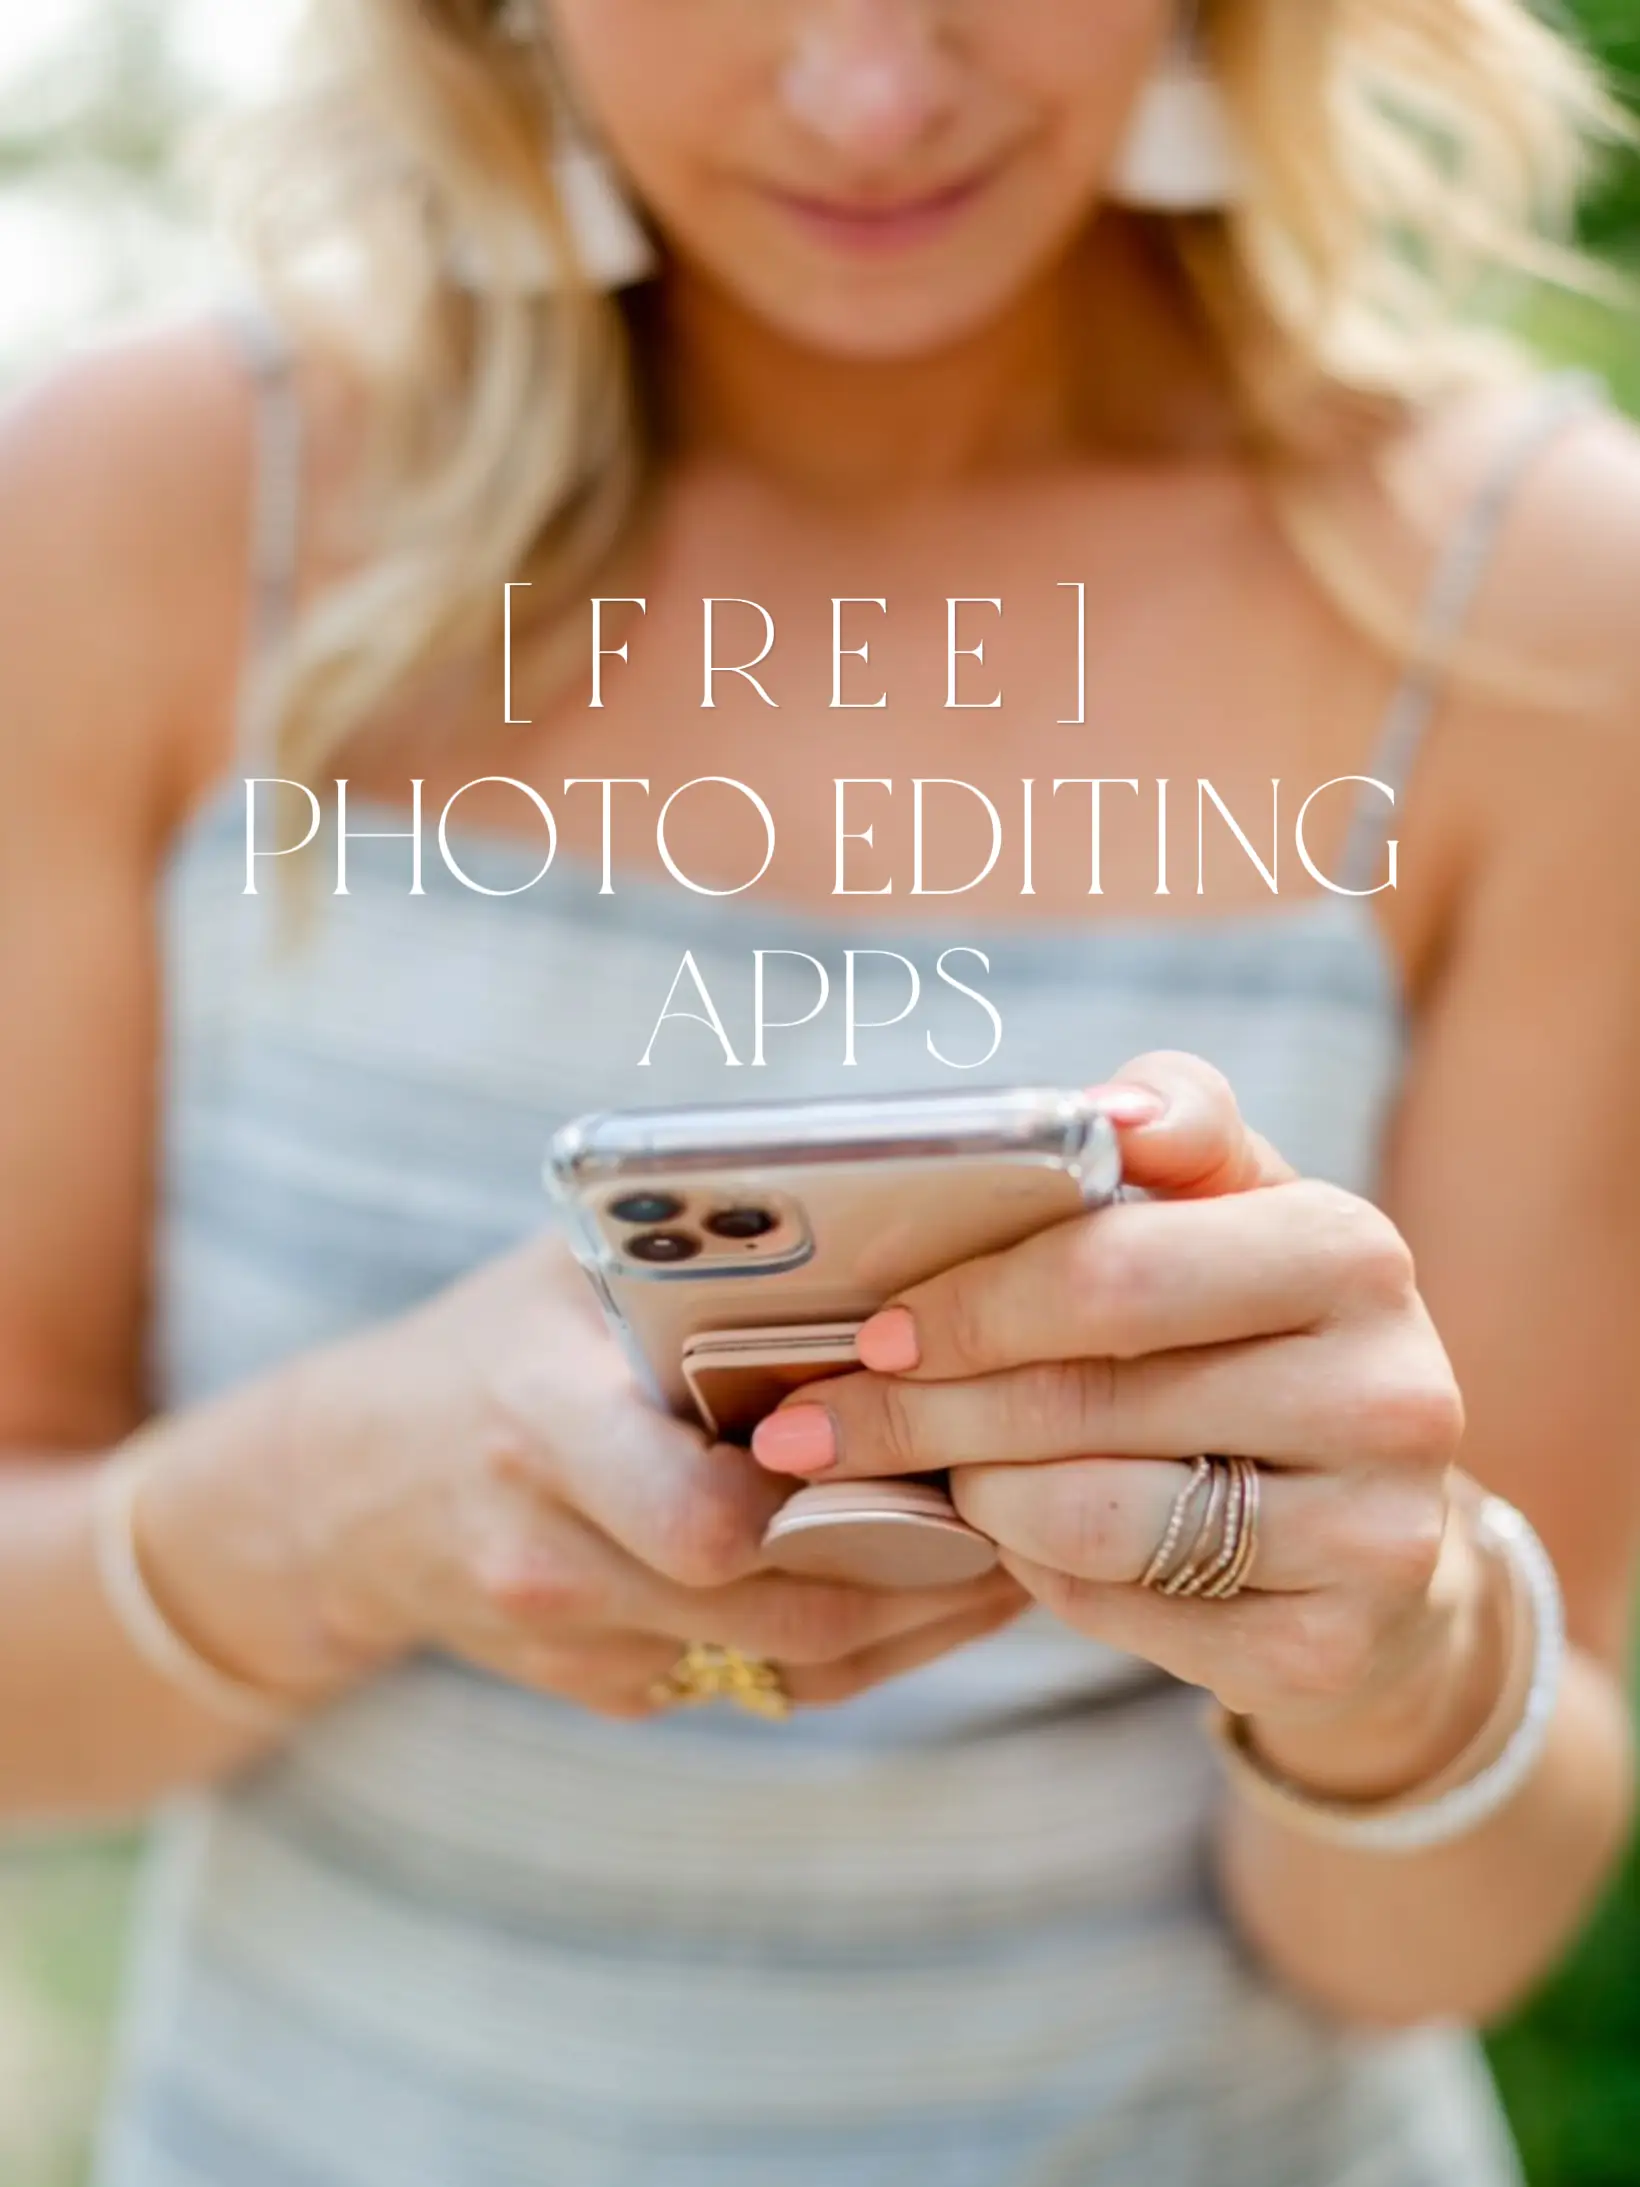 Free Photo Editing Apps 📱's images